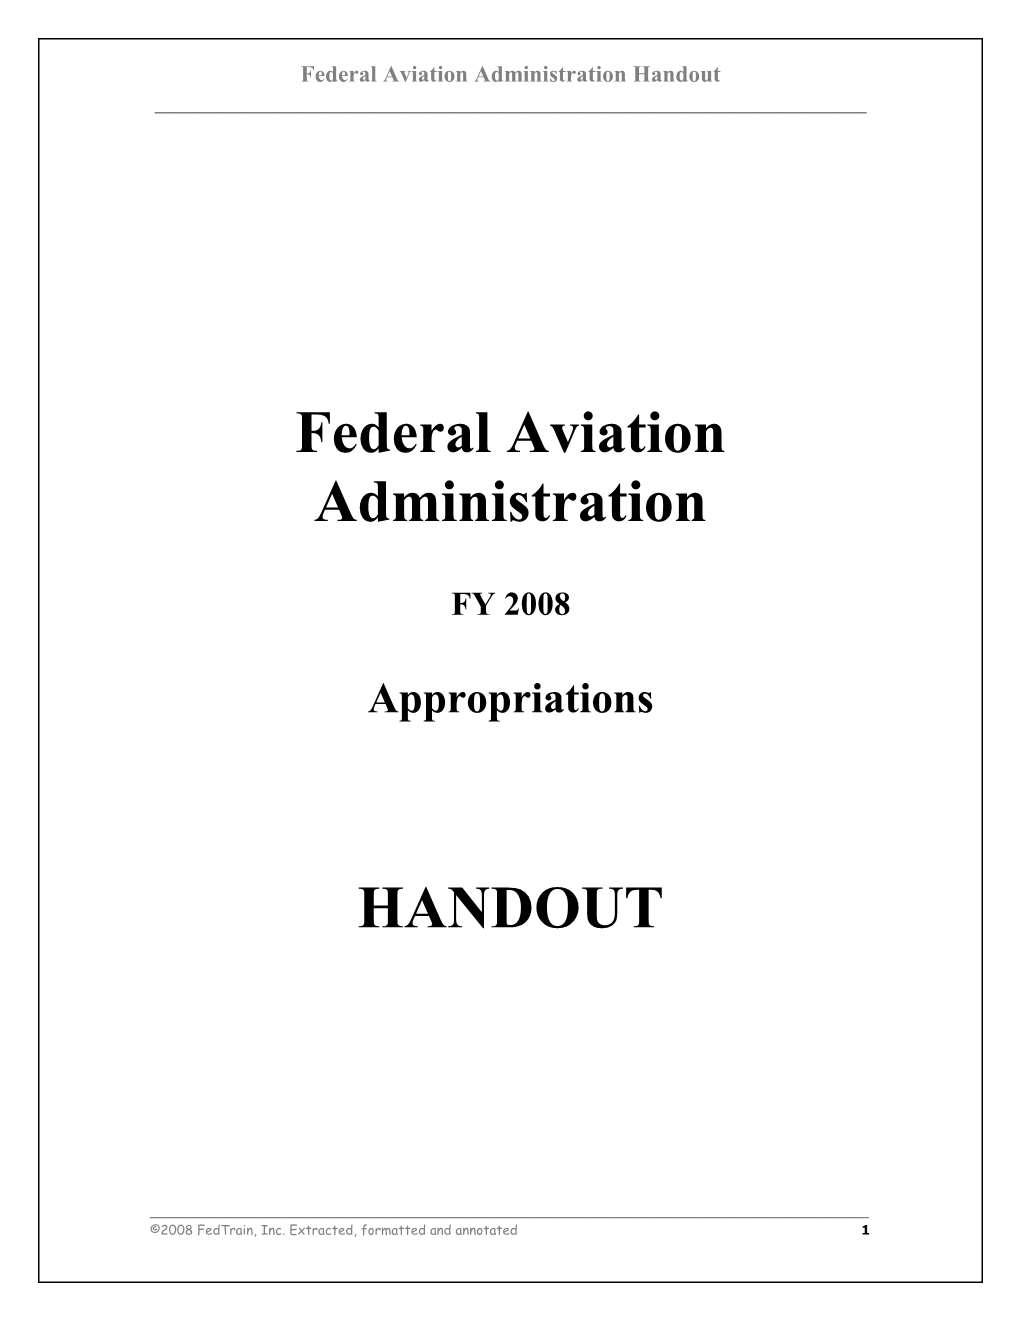 Federal Aviation Administration s1